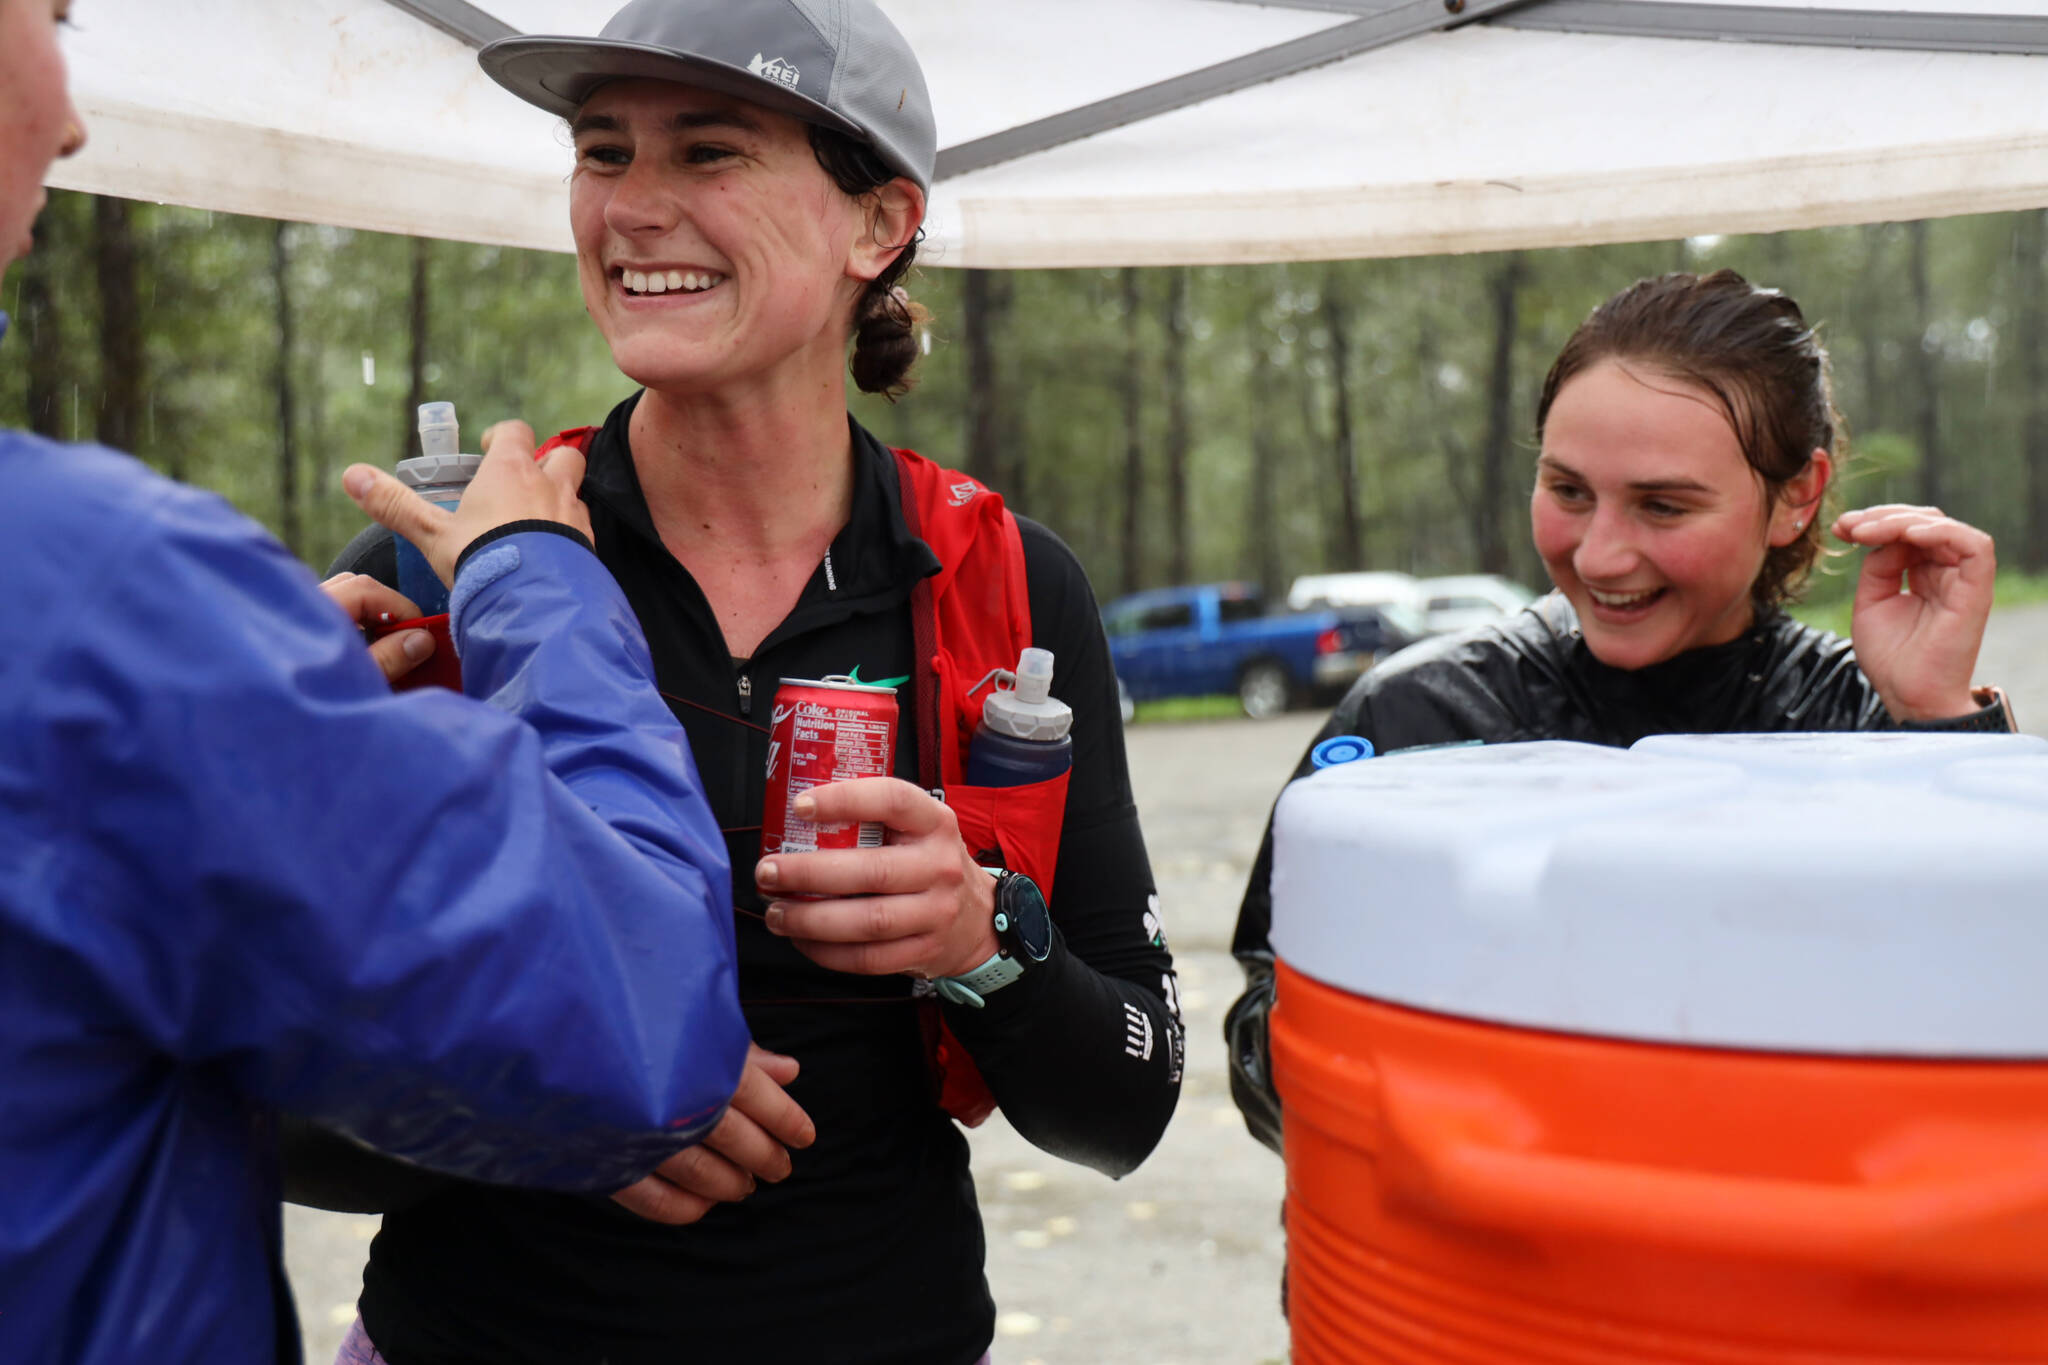 Lauren Tanel smiles as she refuels at an aid station before starting the next leg of the Nifty Fifty 50K race Saturday afternoon. Tanel was the second female finisher of the race with a time of six hours, one minute and 32 seconds.